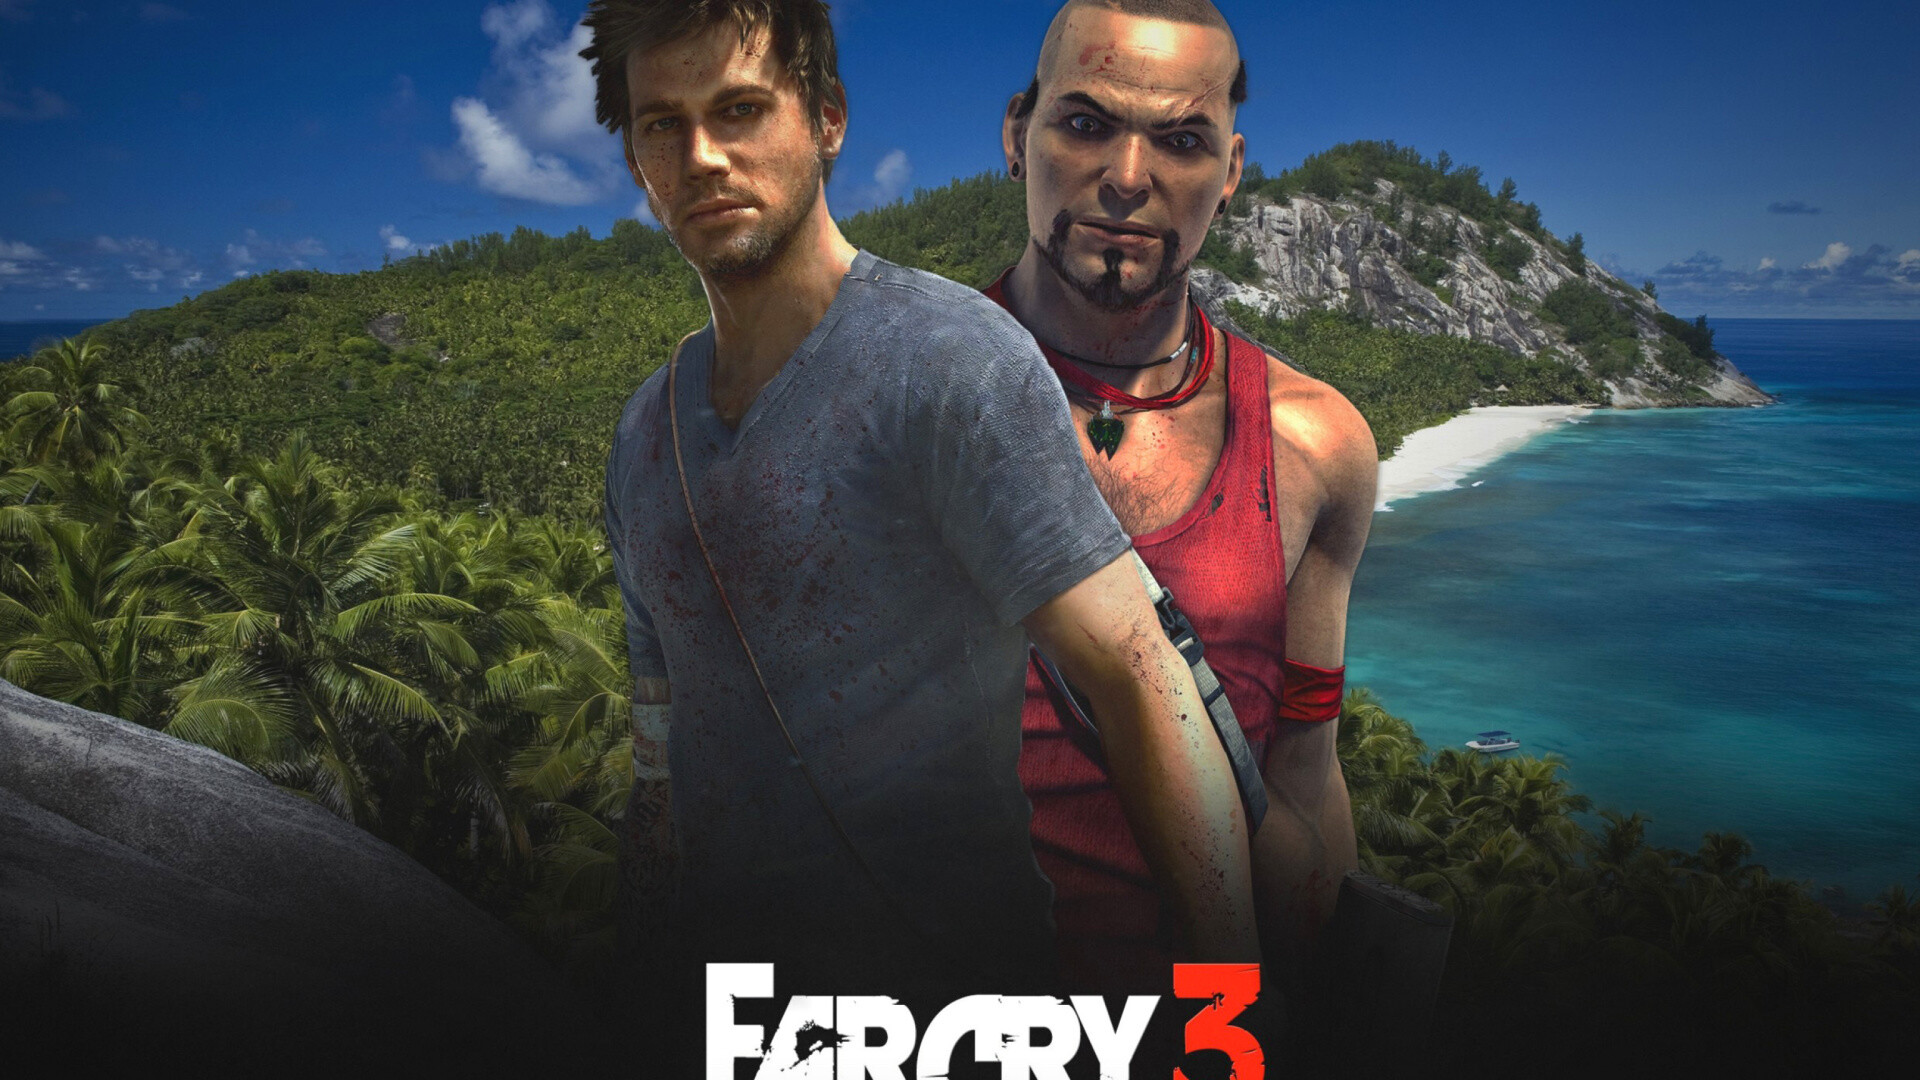 Far Cry 3: Jason Brody, a vacationing thrill-seeker whose friends have been captured by pirates. 1920x1080 Full HD Background.